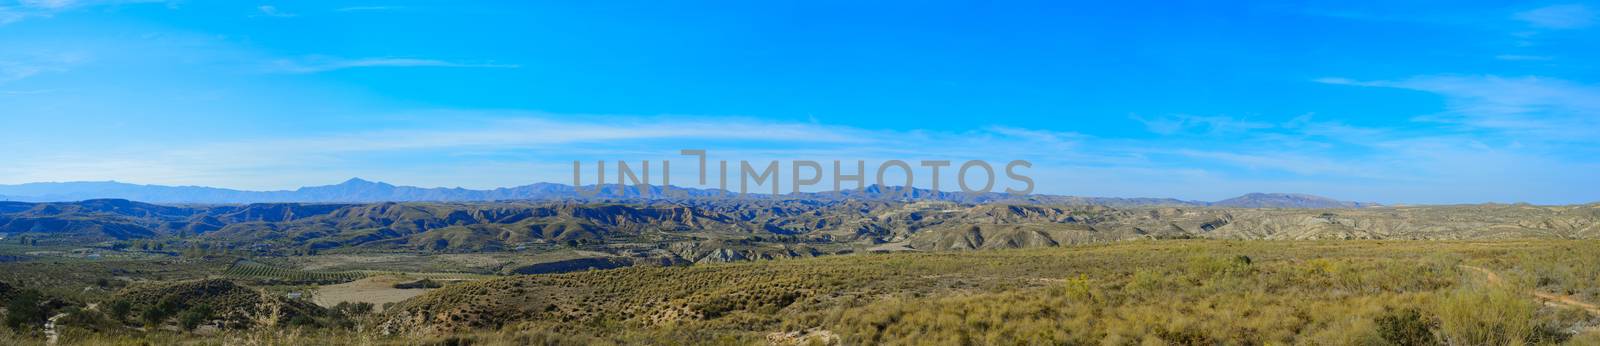 Panoramic mountain landscape by anytka